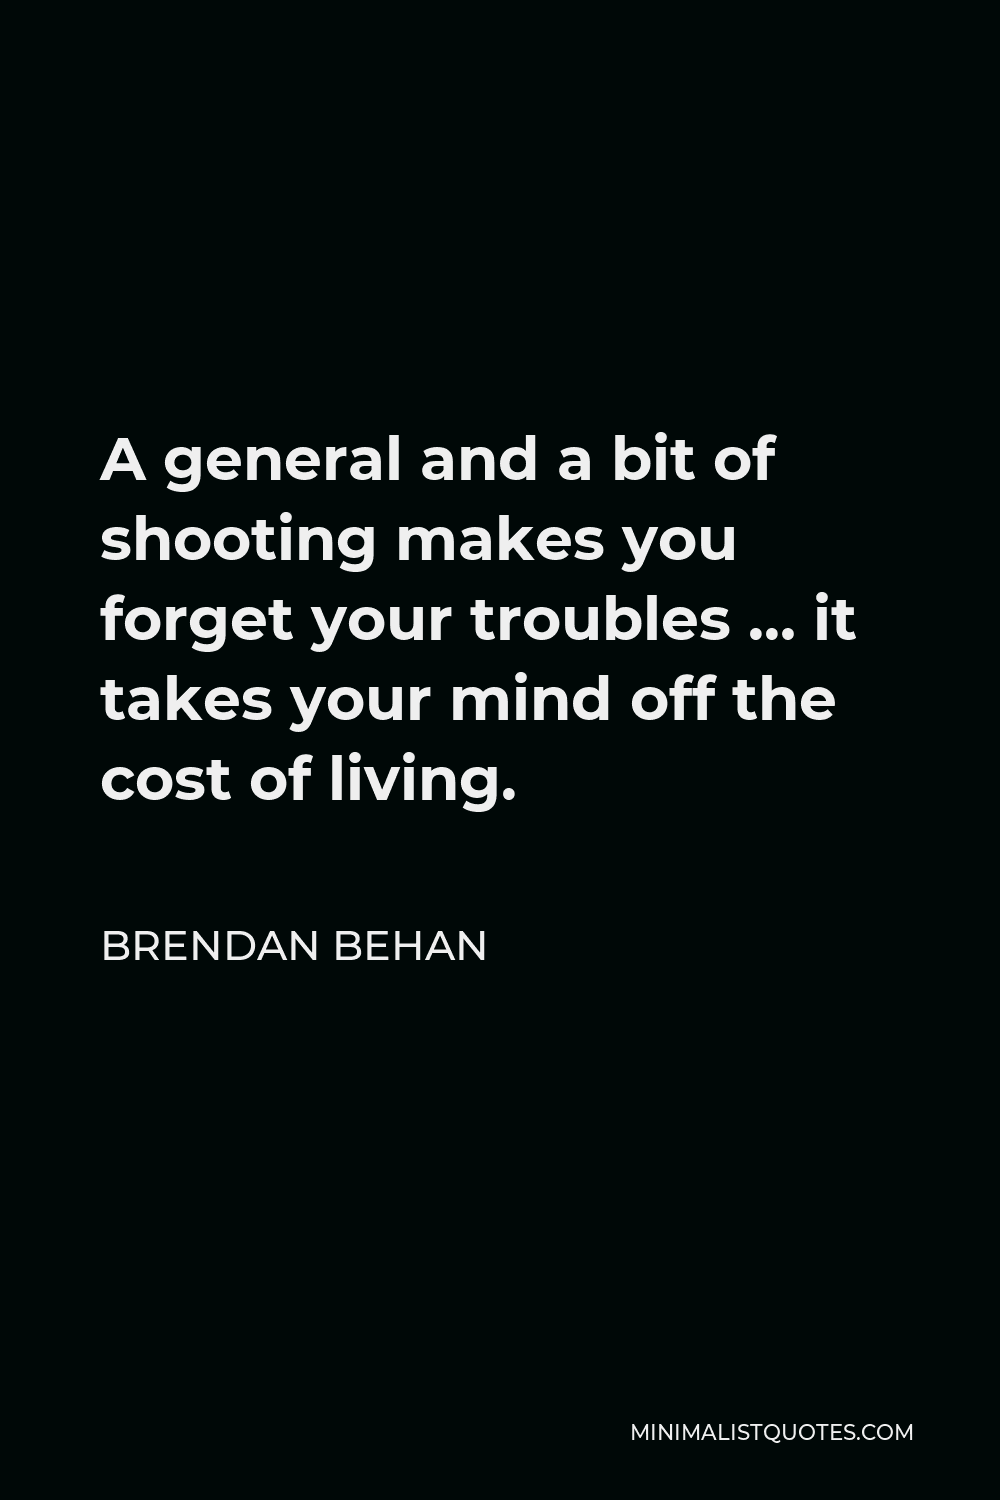 Brendan Behan Quote - A general and a bit of shooting makes you forget your troubles … it takes your mind off the cost of living.